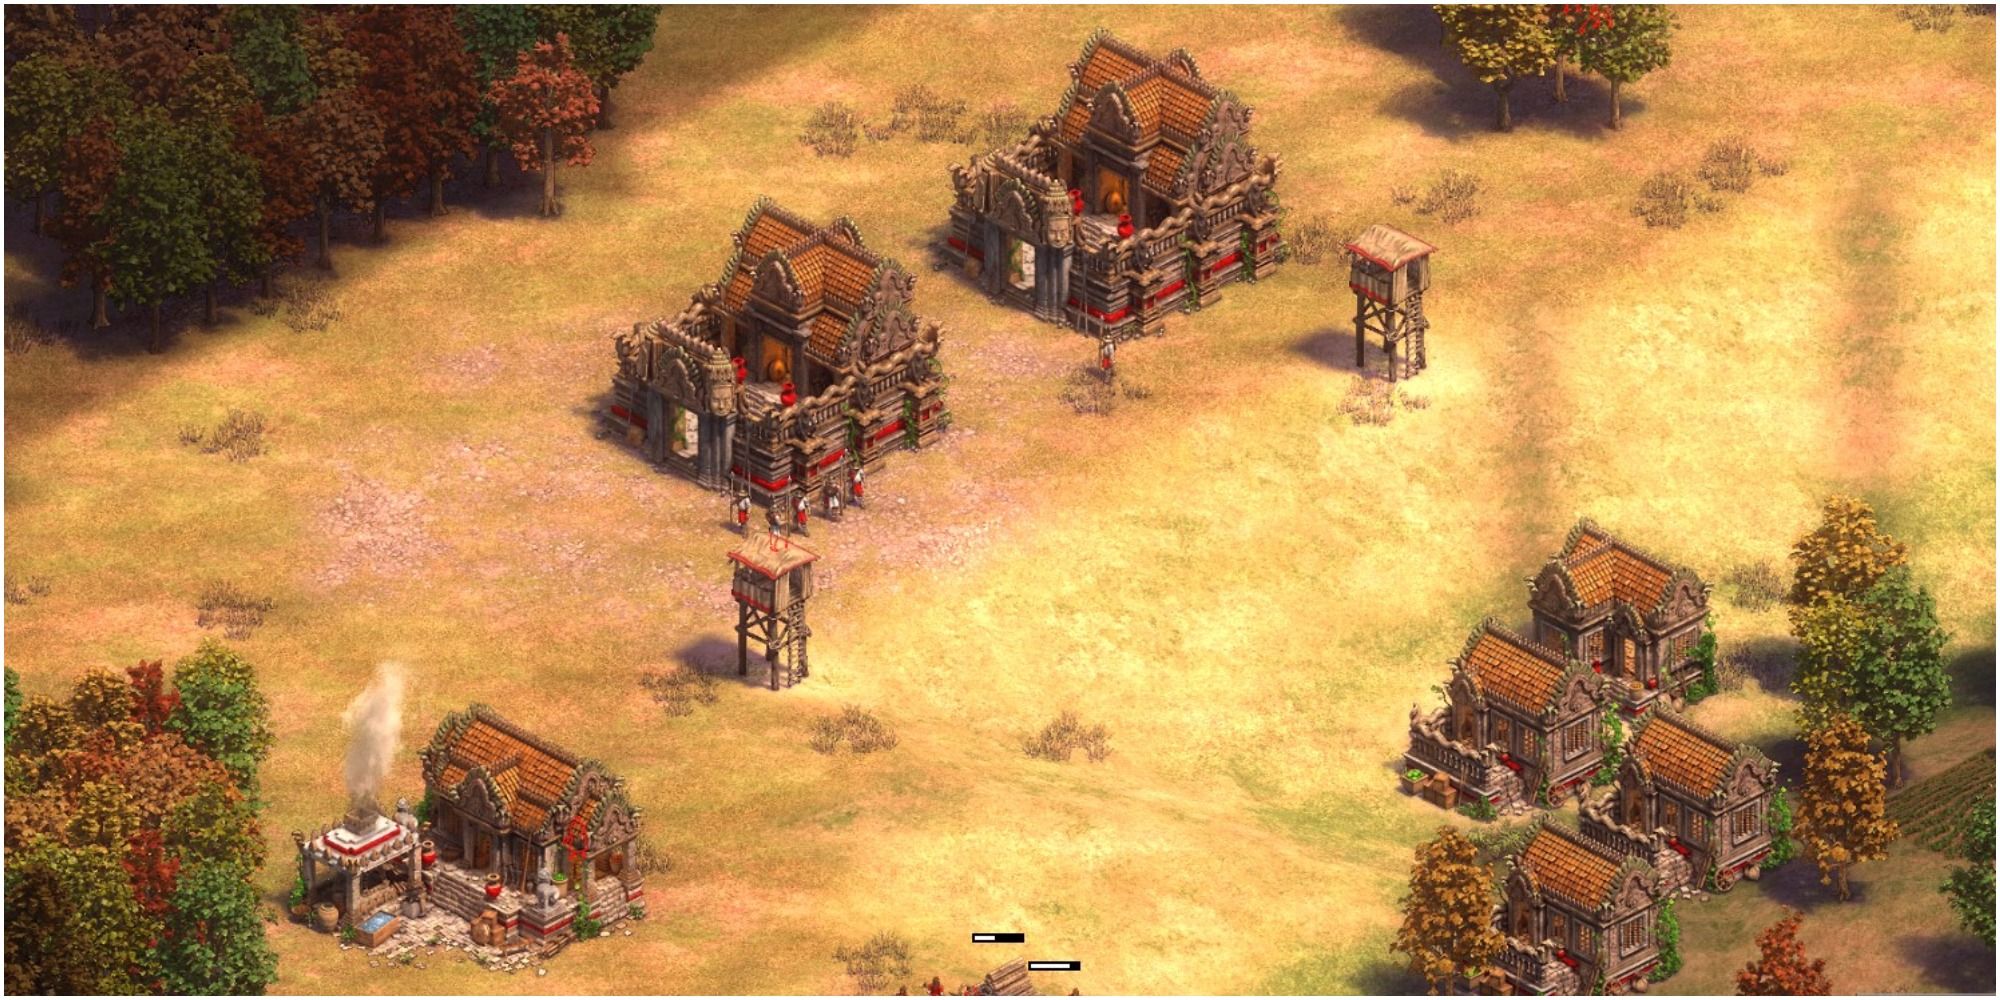 Age of Empires 2 Definitive Edition Khmer Blacksmith, Barracks, Towers, and Houses